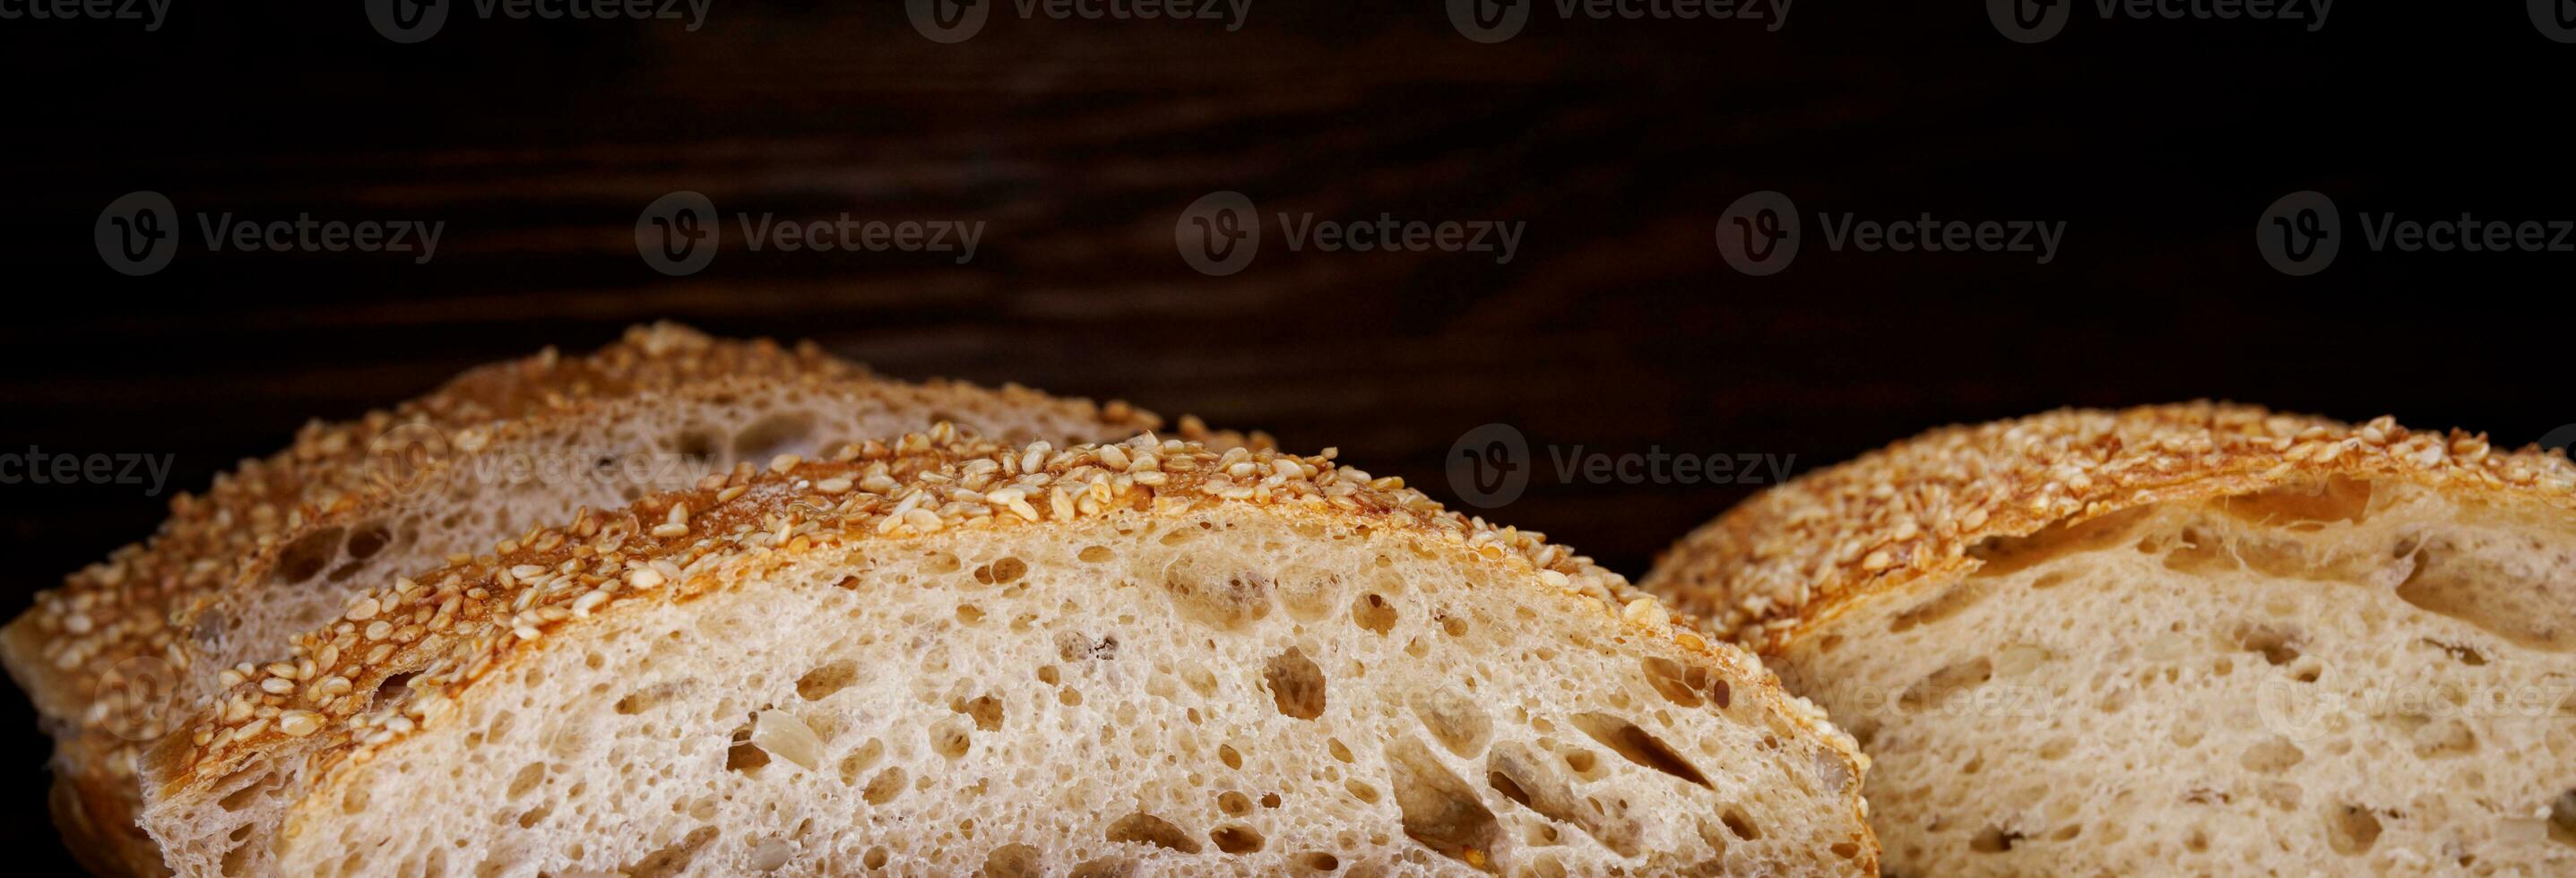 Ciabatta bread. Sliced pieces of bread on a wooden background. photo